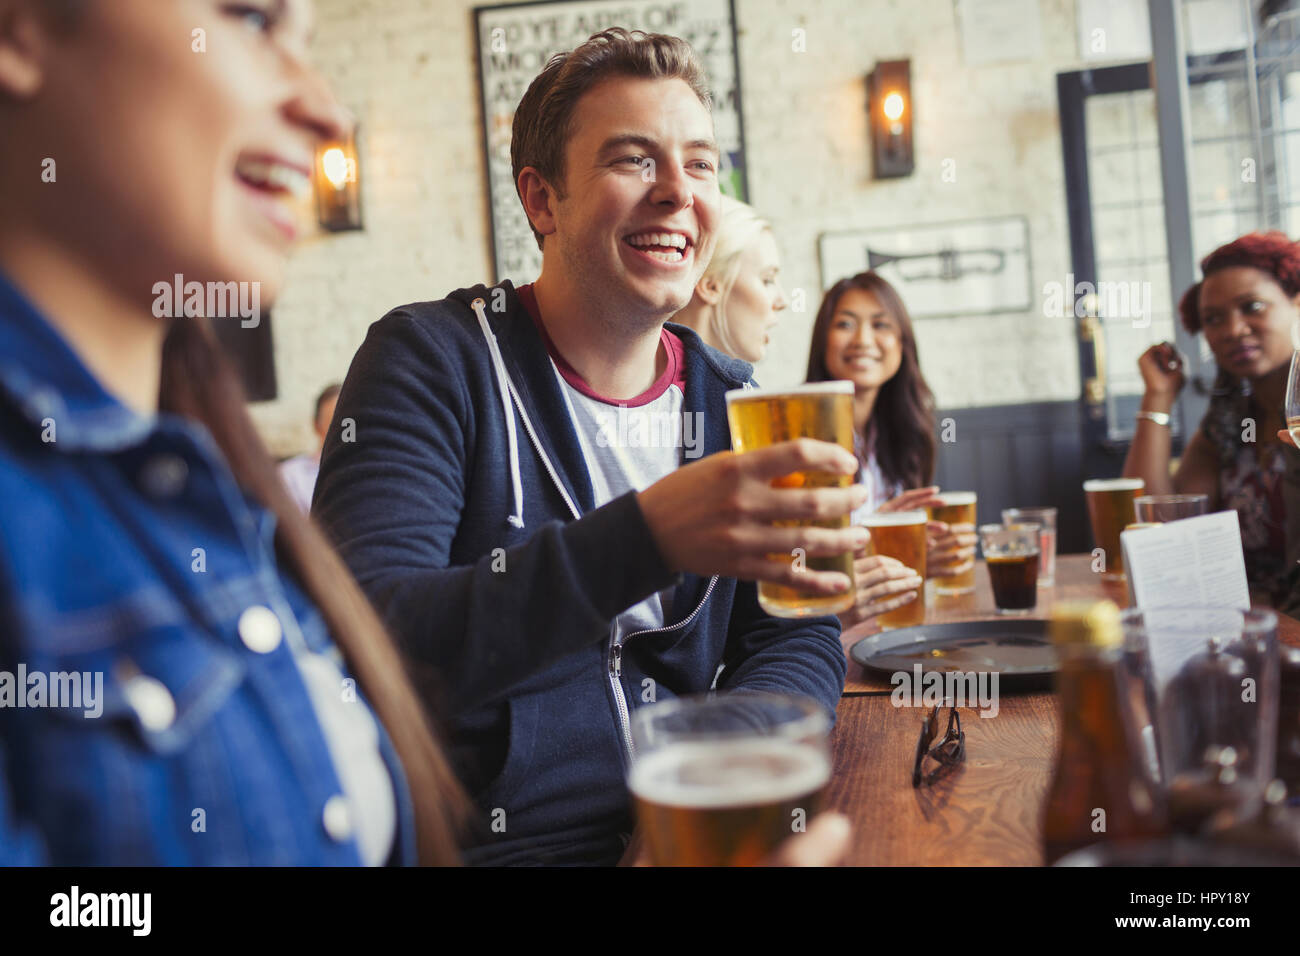 Smiling man drinking beer with friends at table in bar Stock Photo